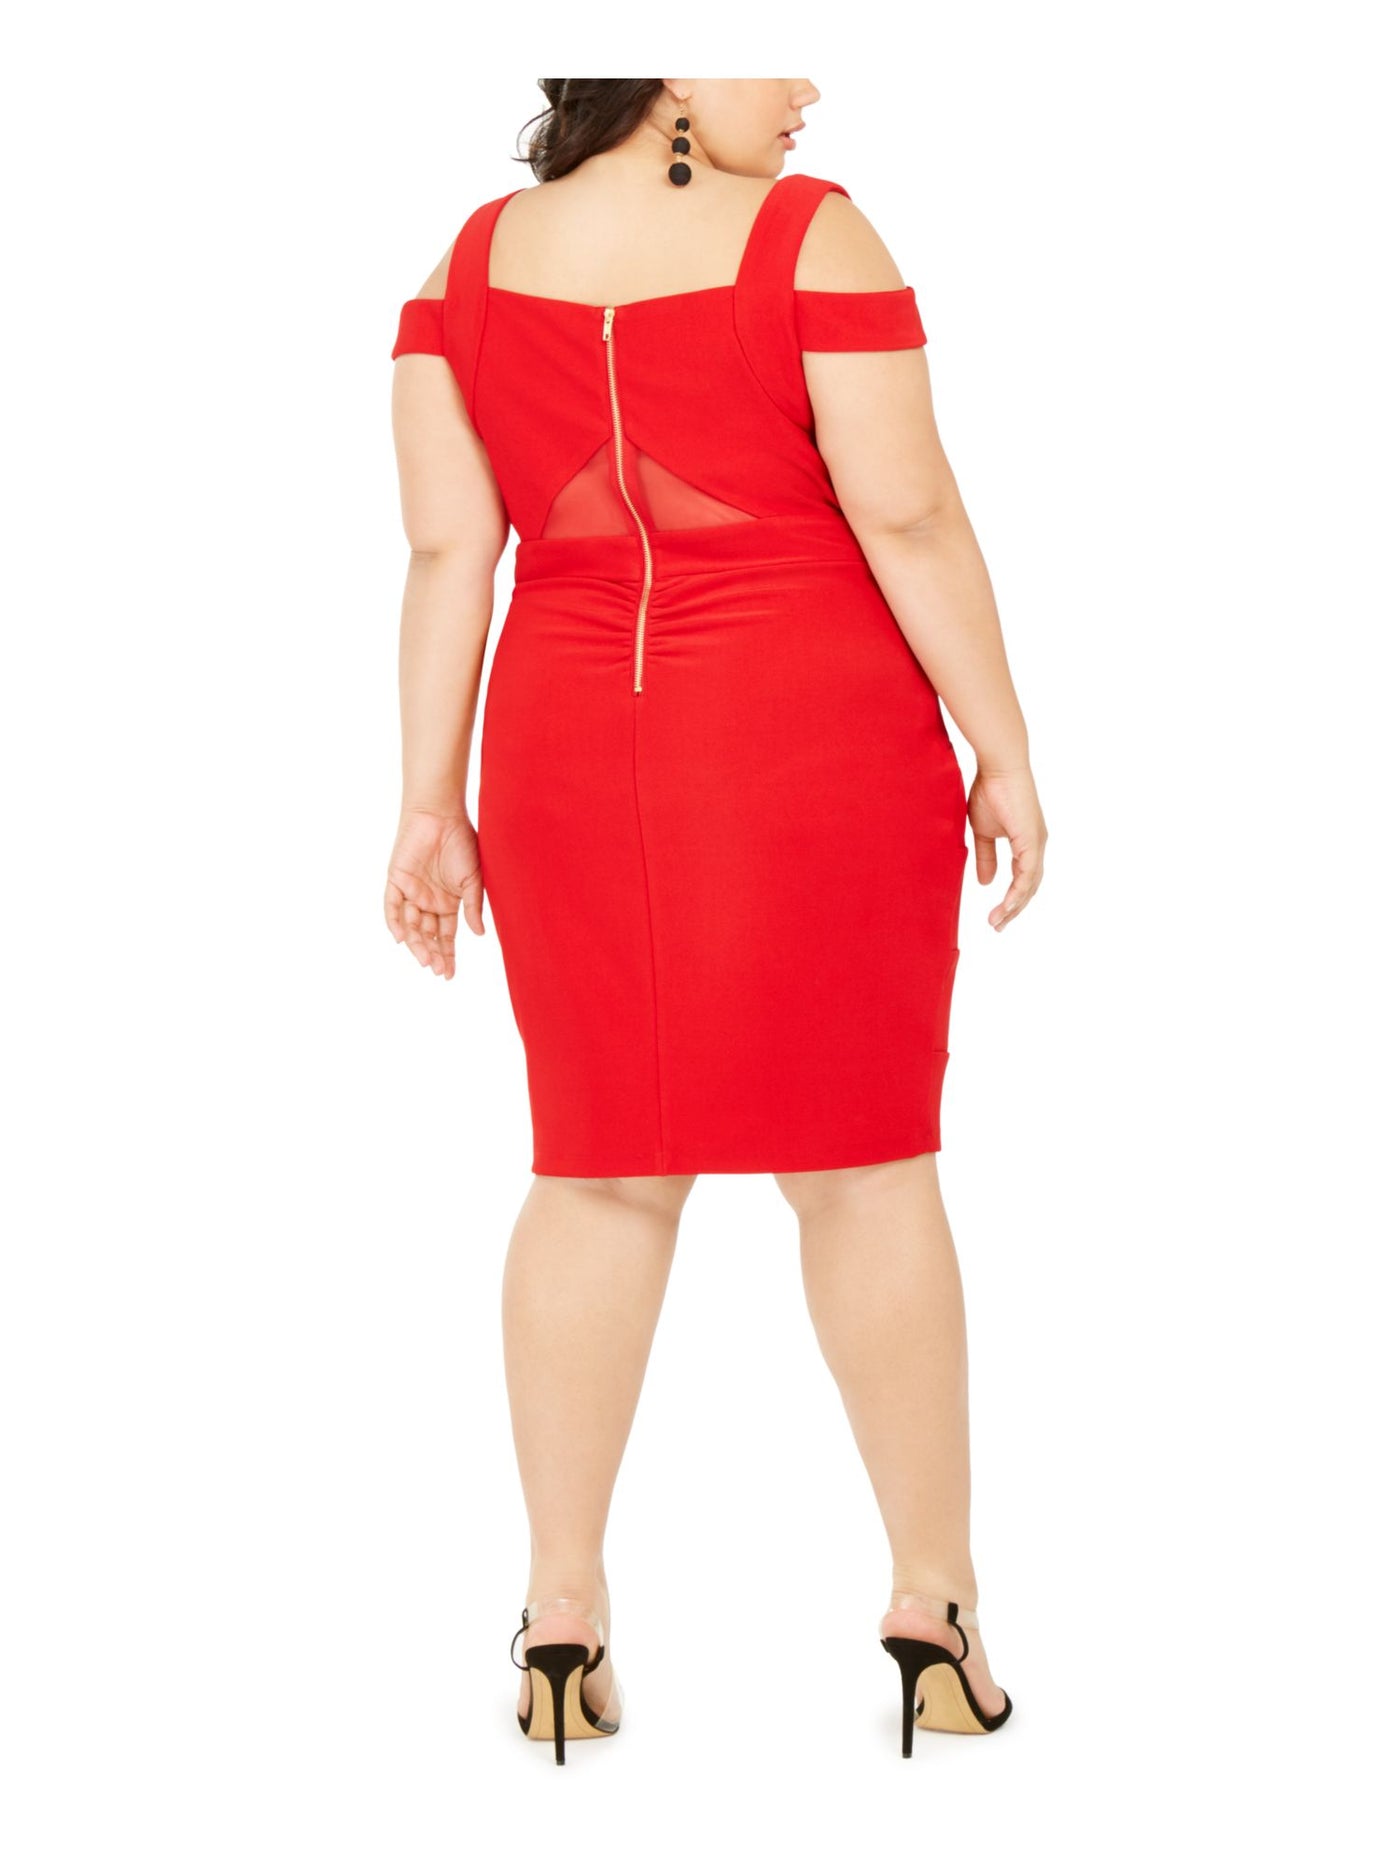 EMERALD SUNDAE Womens Red Cold Shoulder Cut Out Sleeveless Sweetheart Neckline Below The Knee Cocktail Body Con Dress Plus 3X